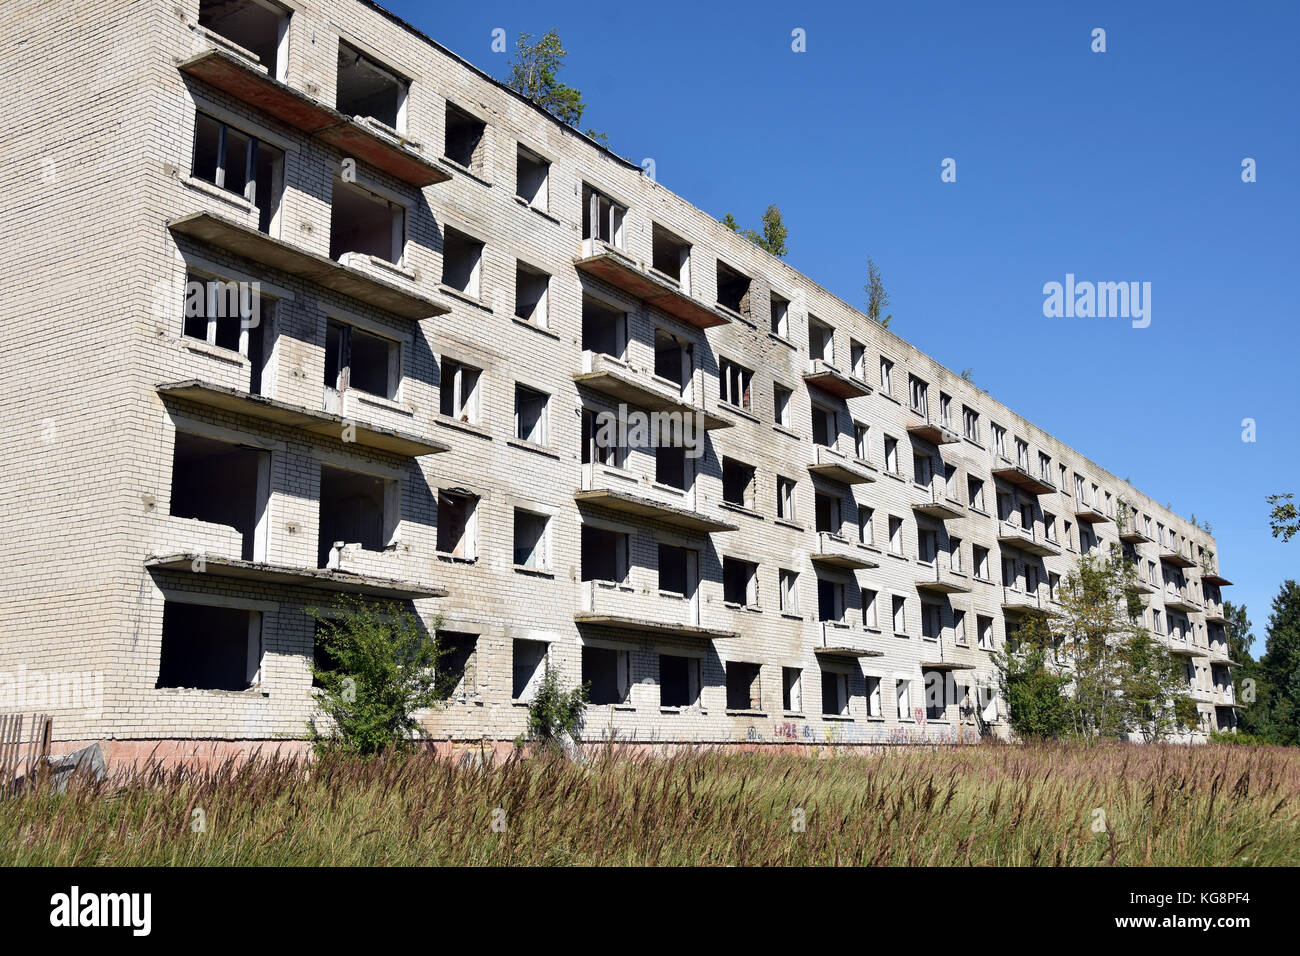 The city where people of the soviet spy antenna base lived before the USSR collapse. Stock Photo